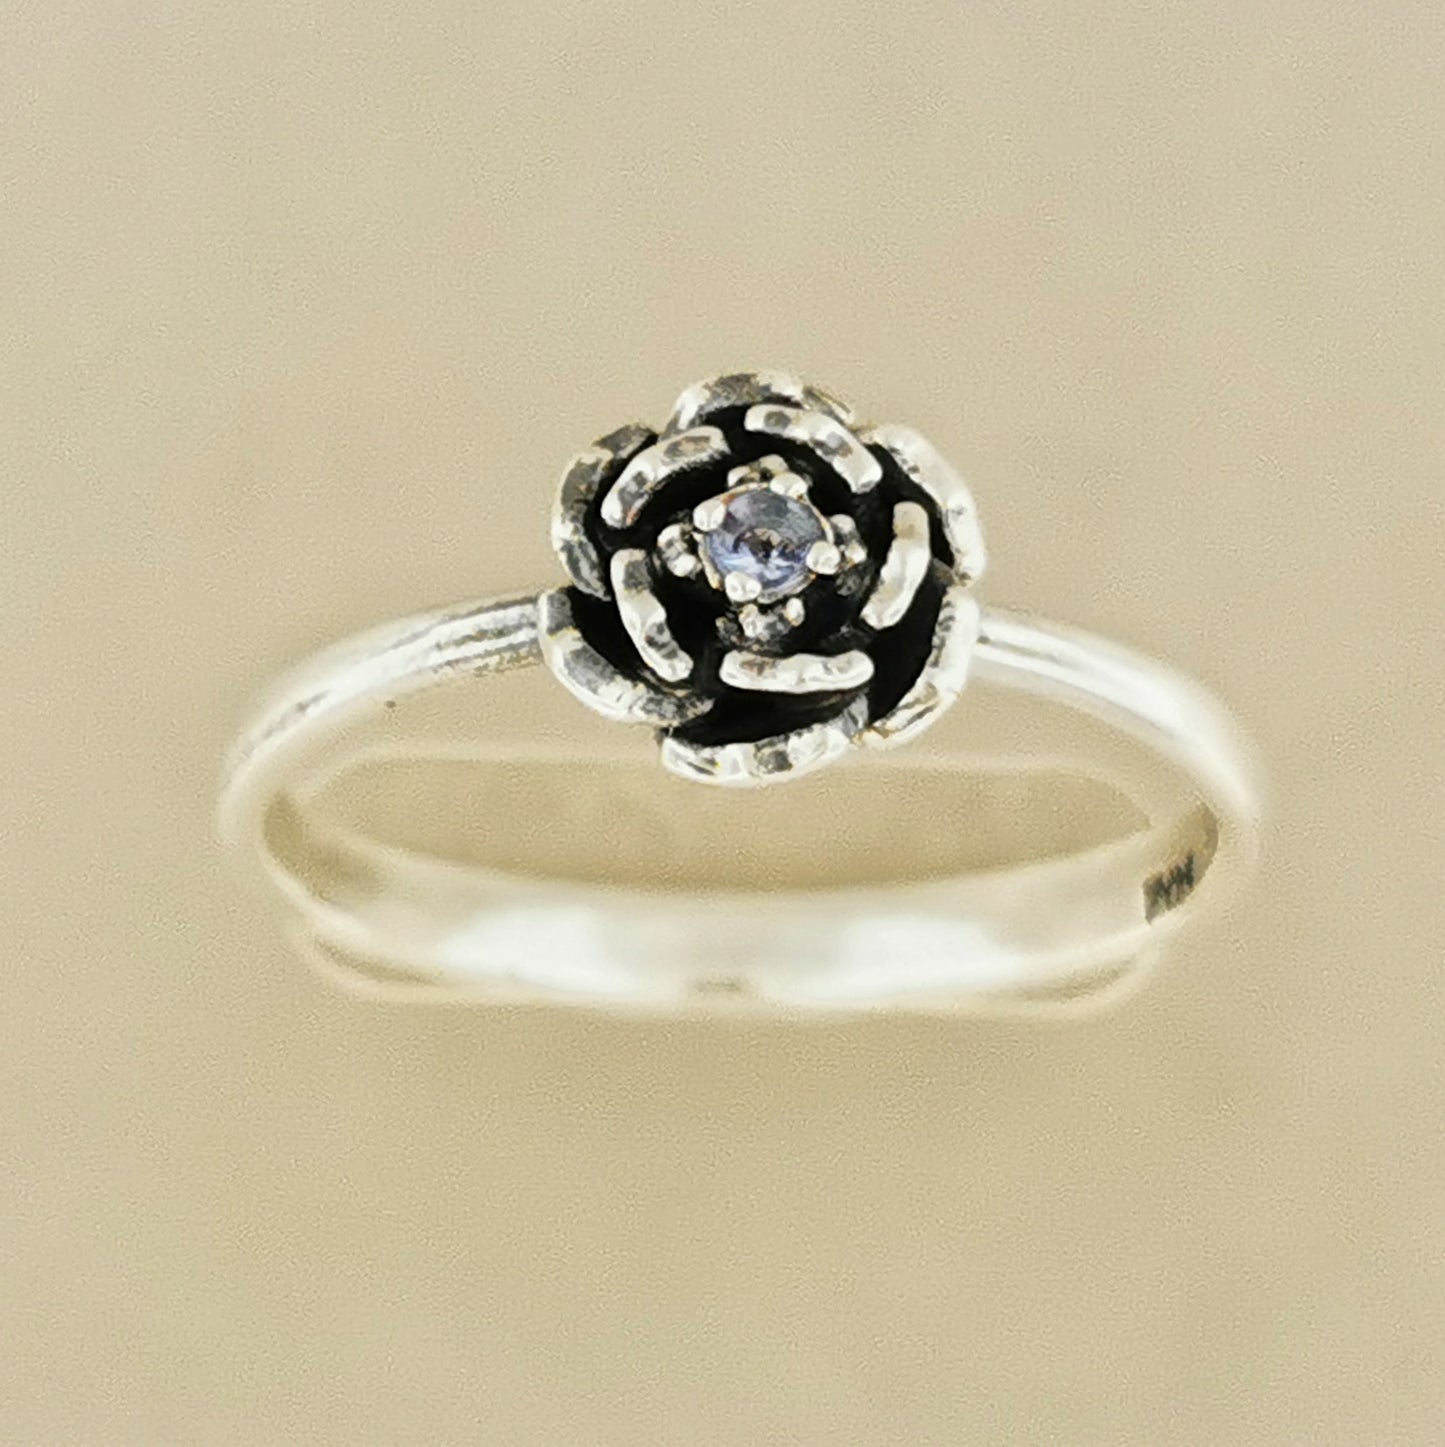 Small Rose Ring with Gemstone in Sterling Silver